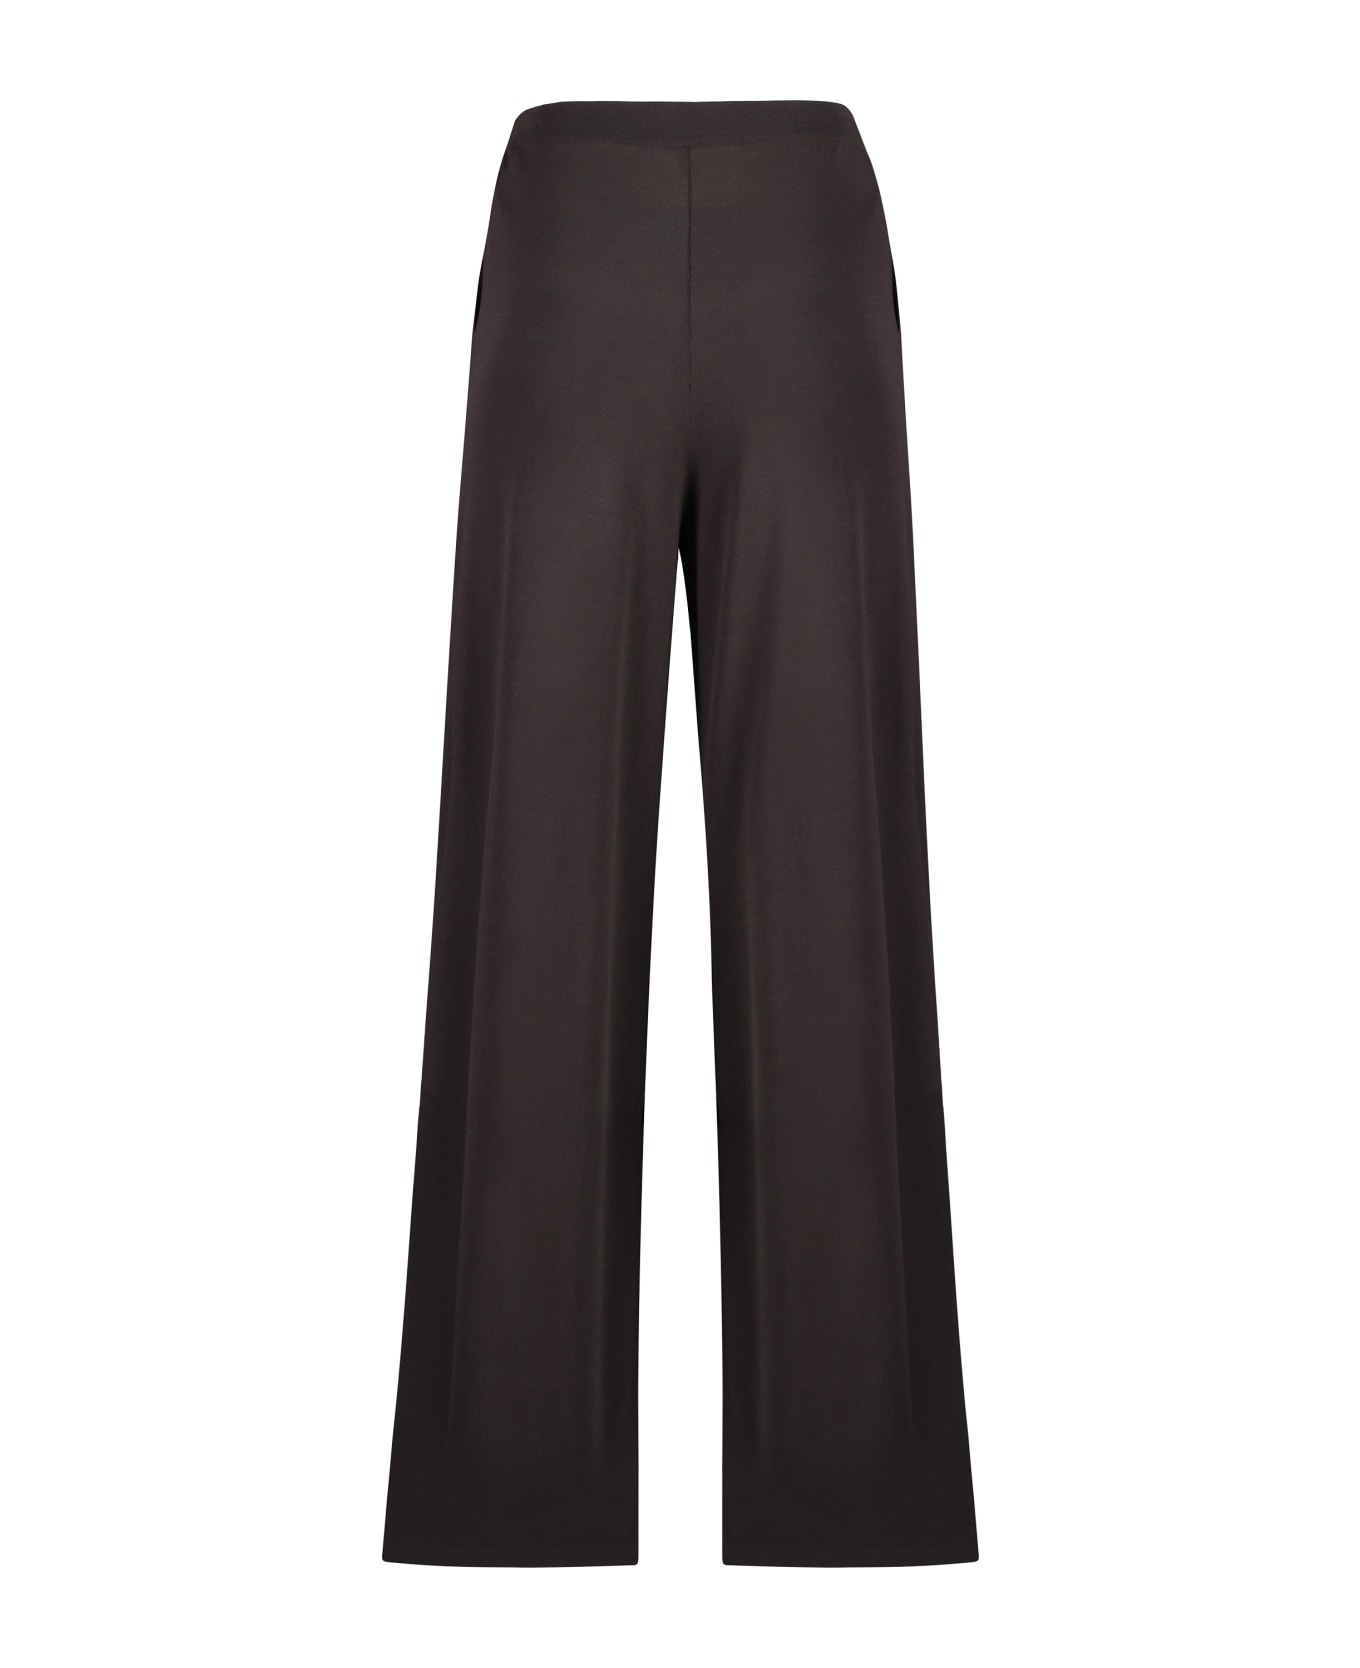 Parosh Knitted Trousers - brown